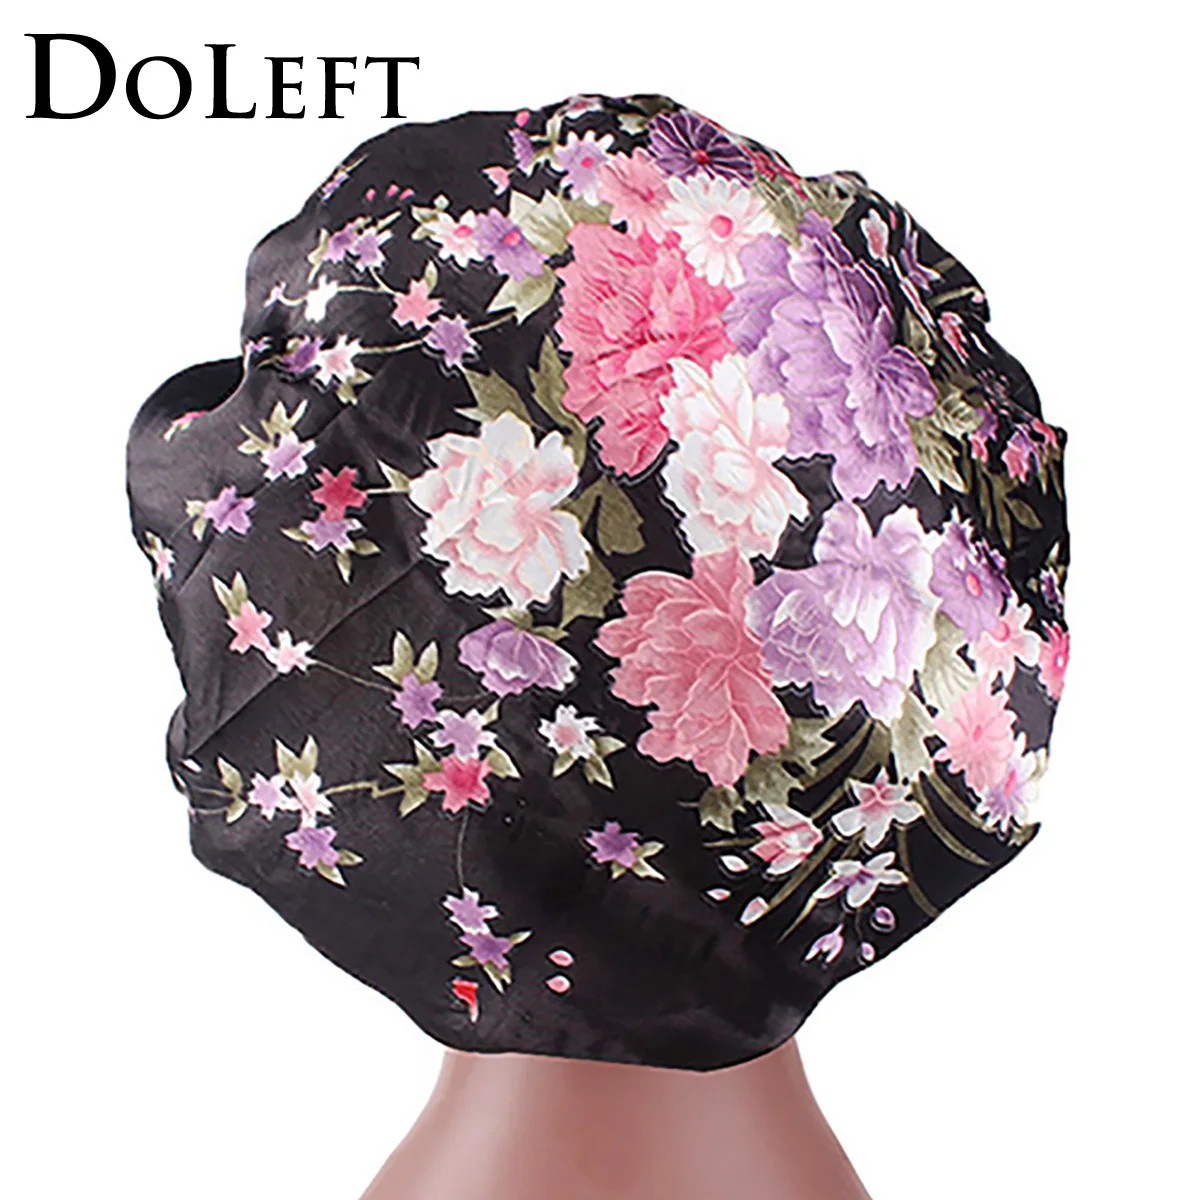 DOLEFT Satin Printed Wide-brimmed Hair Band Woman High Quality Soft Silk Bonnet Sleep Cap Chemotherapy Caps